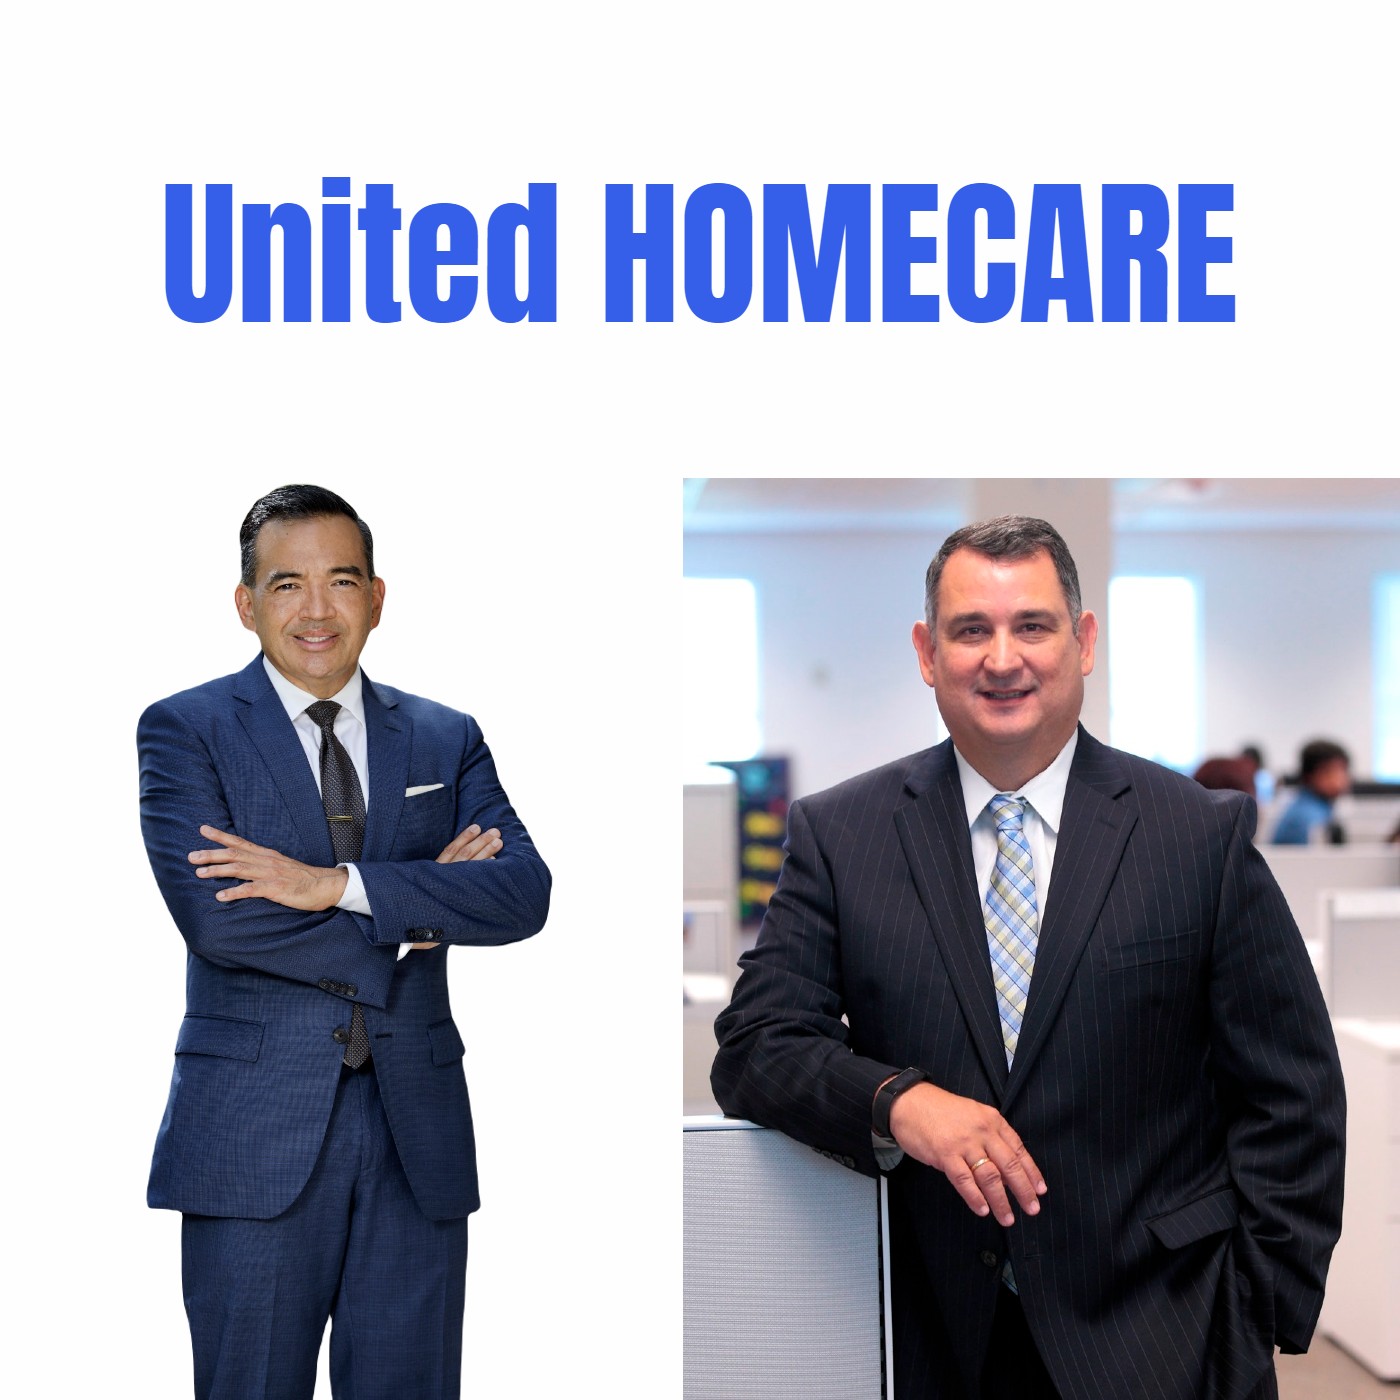 United HOMECARE taking care of our older and disabled adults in the comfort of their own homes.